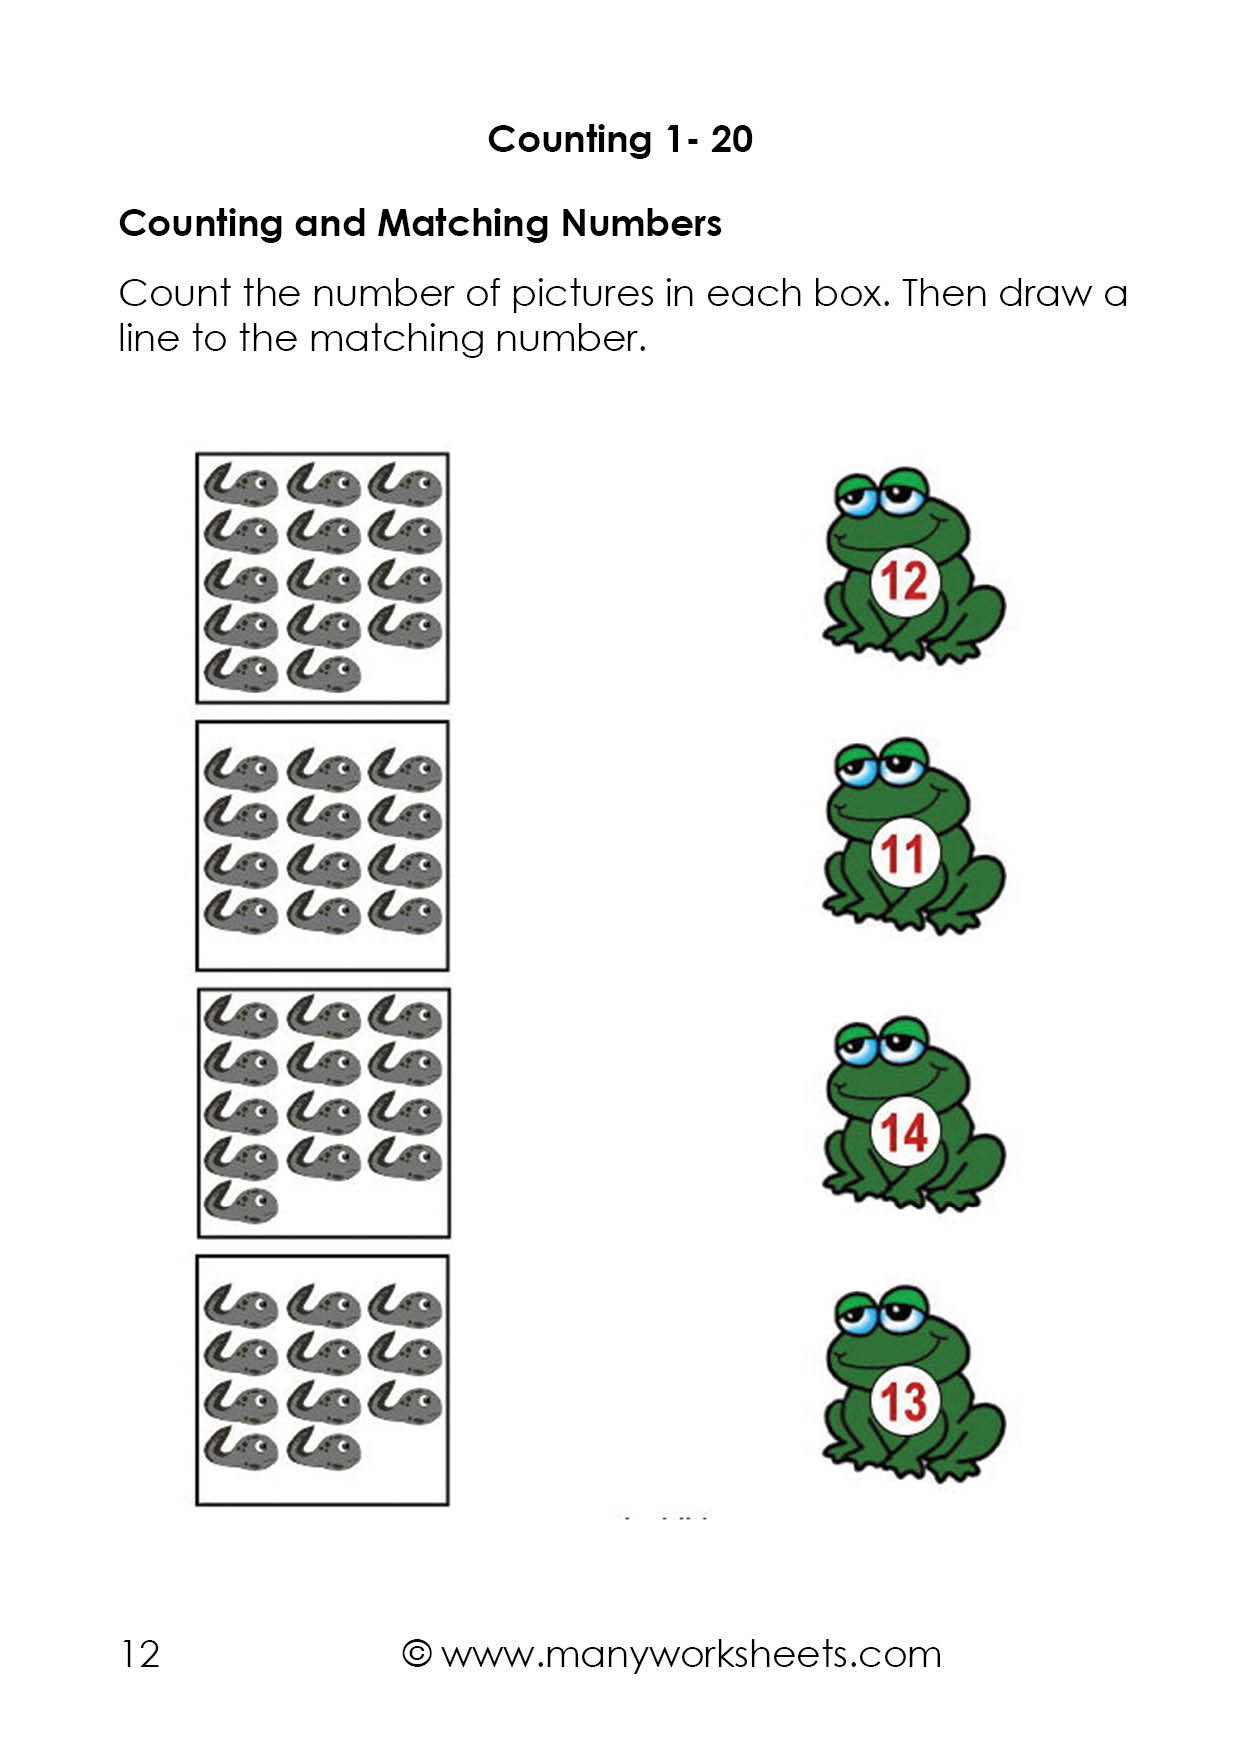 Counting to 20 Worksheet Counting to 20 and Matching Numbers Worksheets